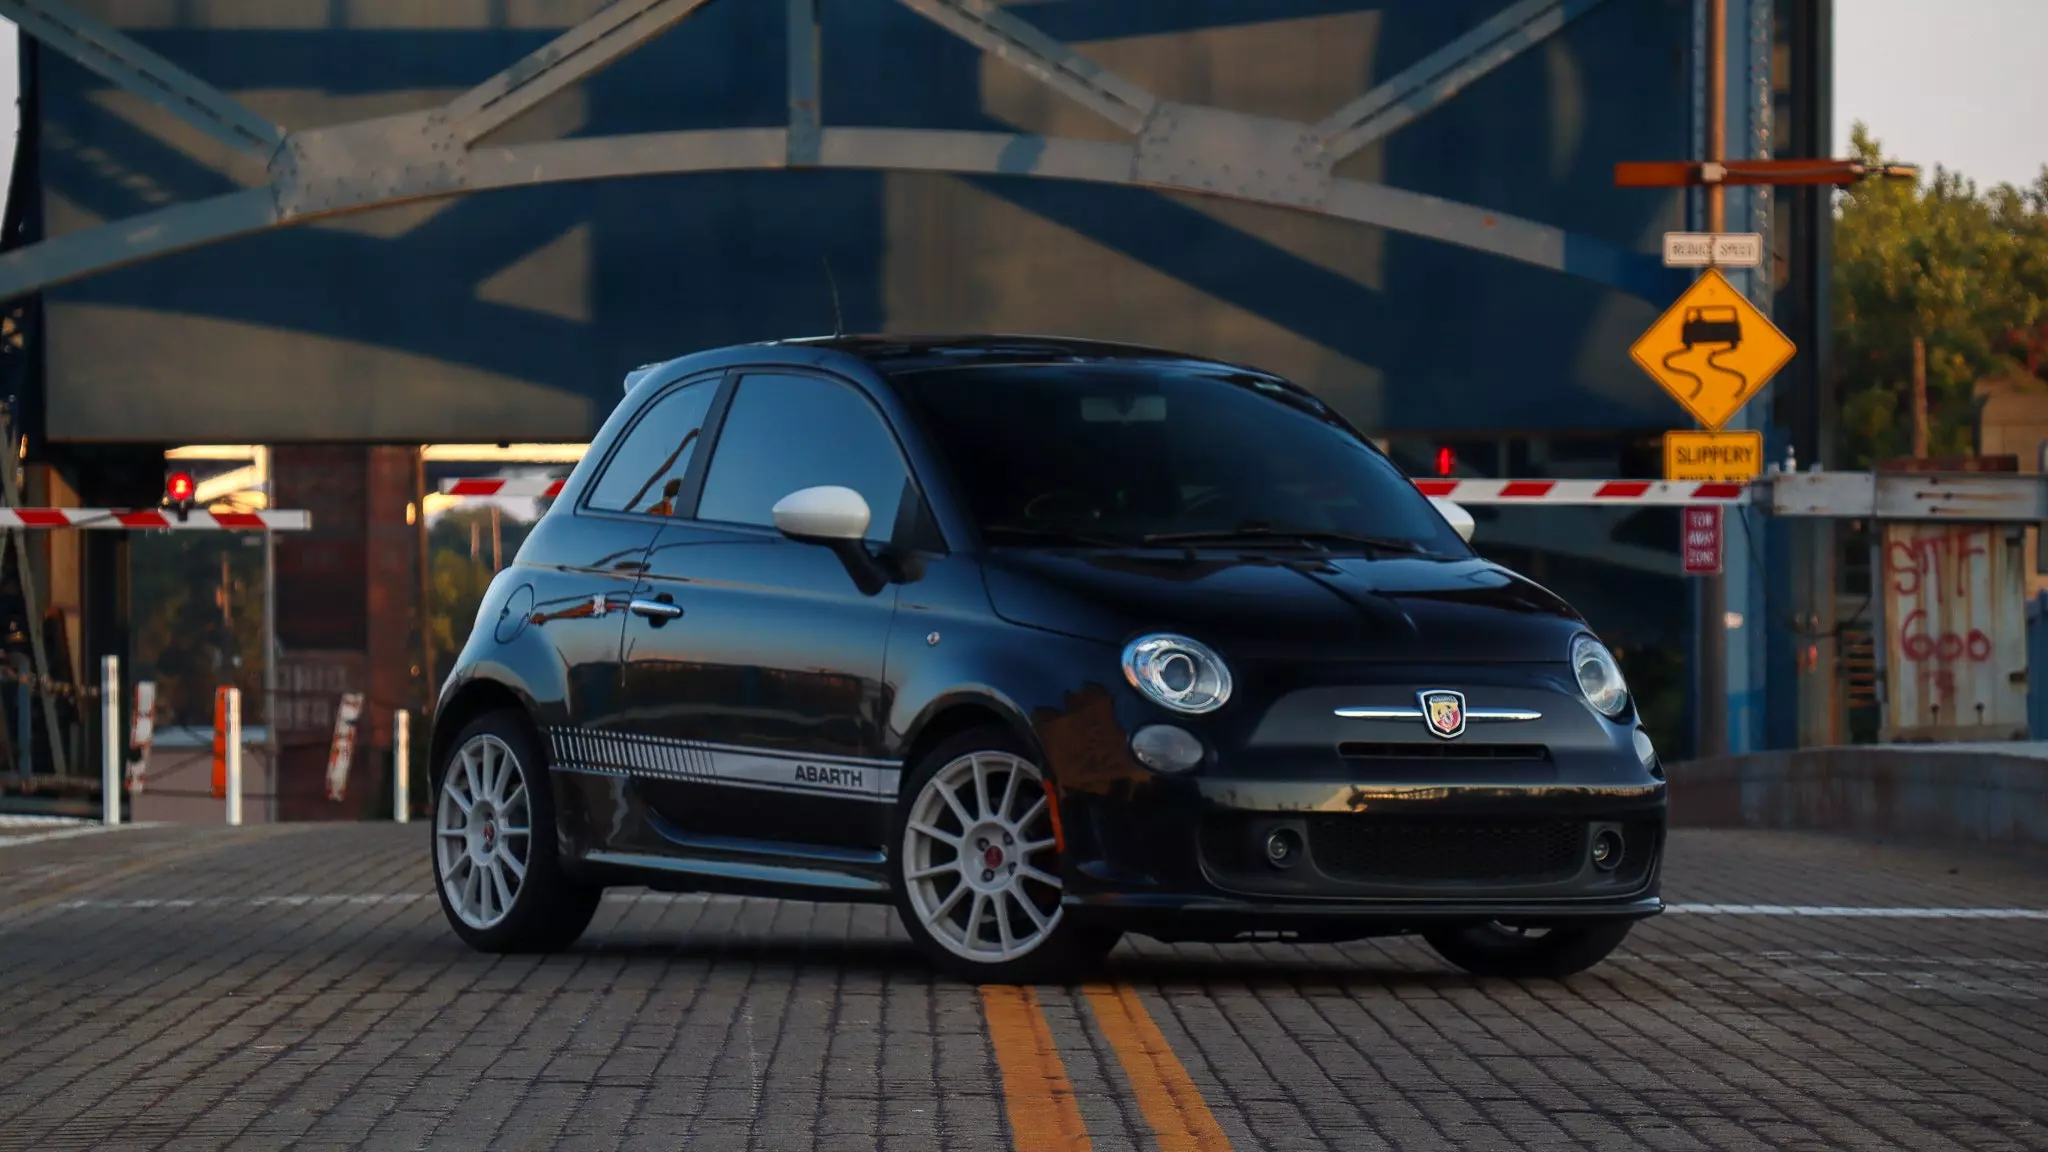 Cleveland&#8217;s Drawbridges Are Great Backdrops for My Fiat 500 | Autance